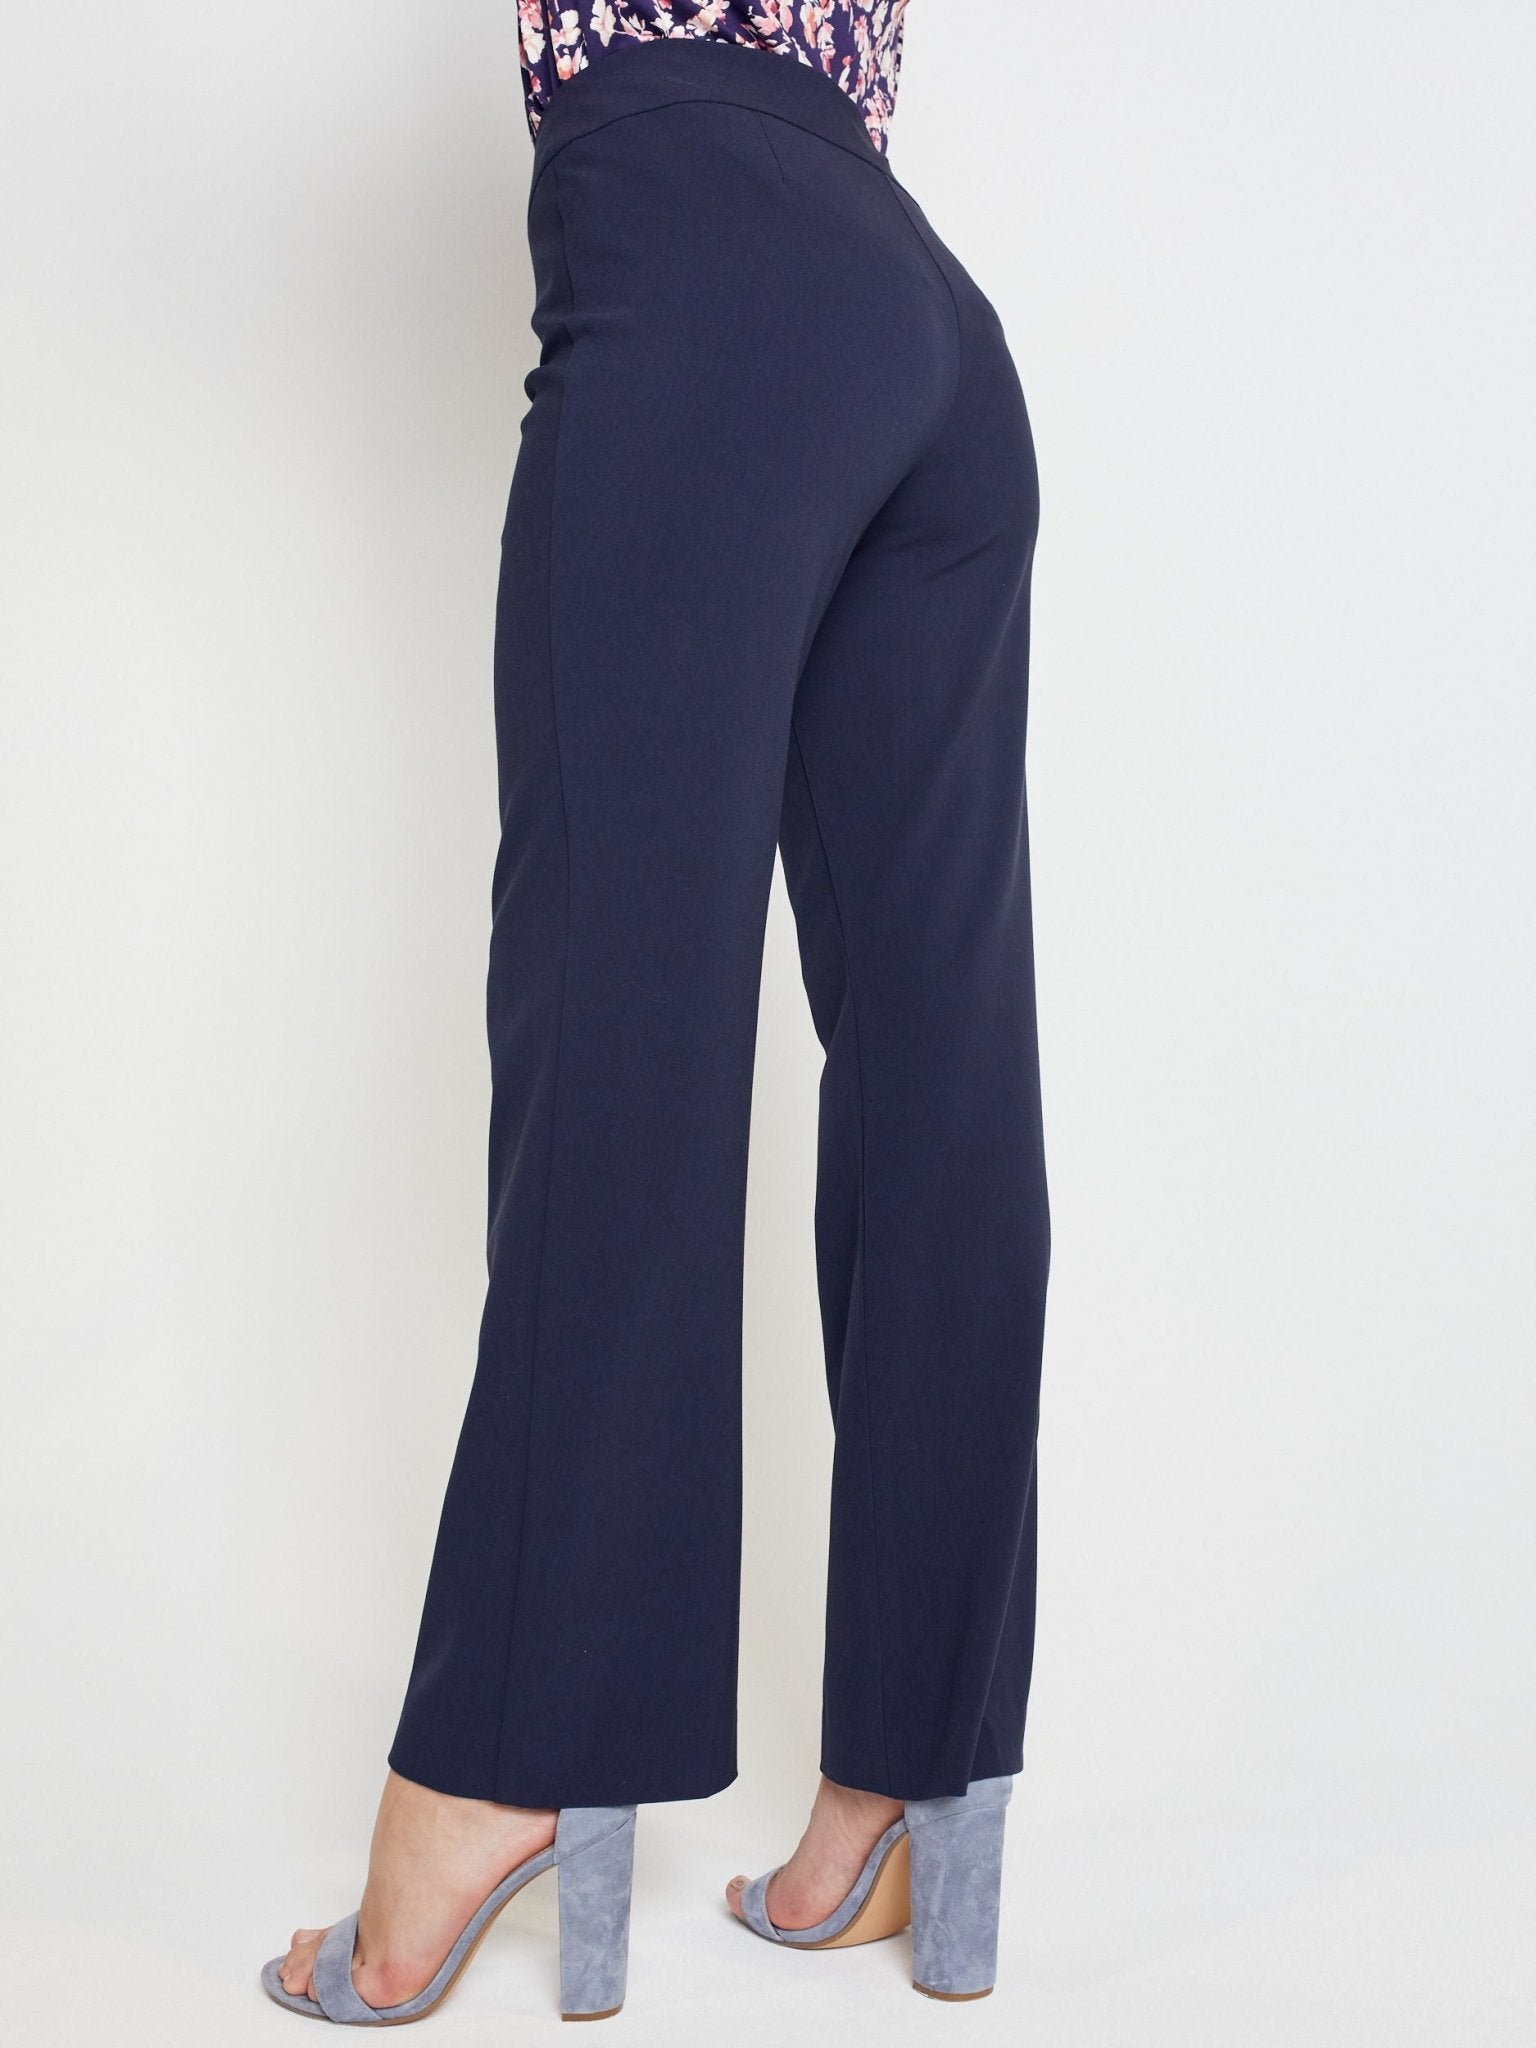  Sales Today Clearance Pull Up Dress Pants Women Tummy